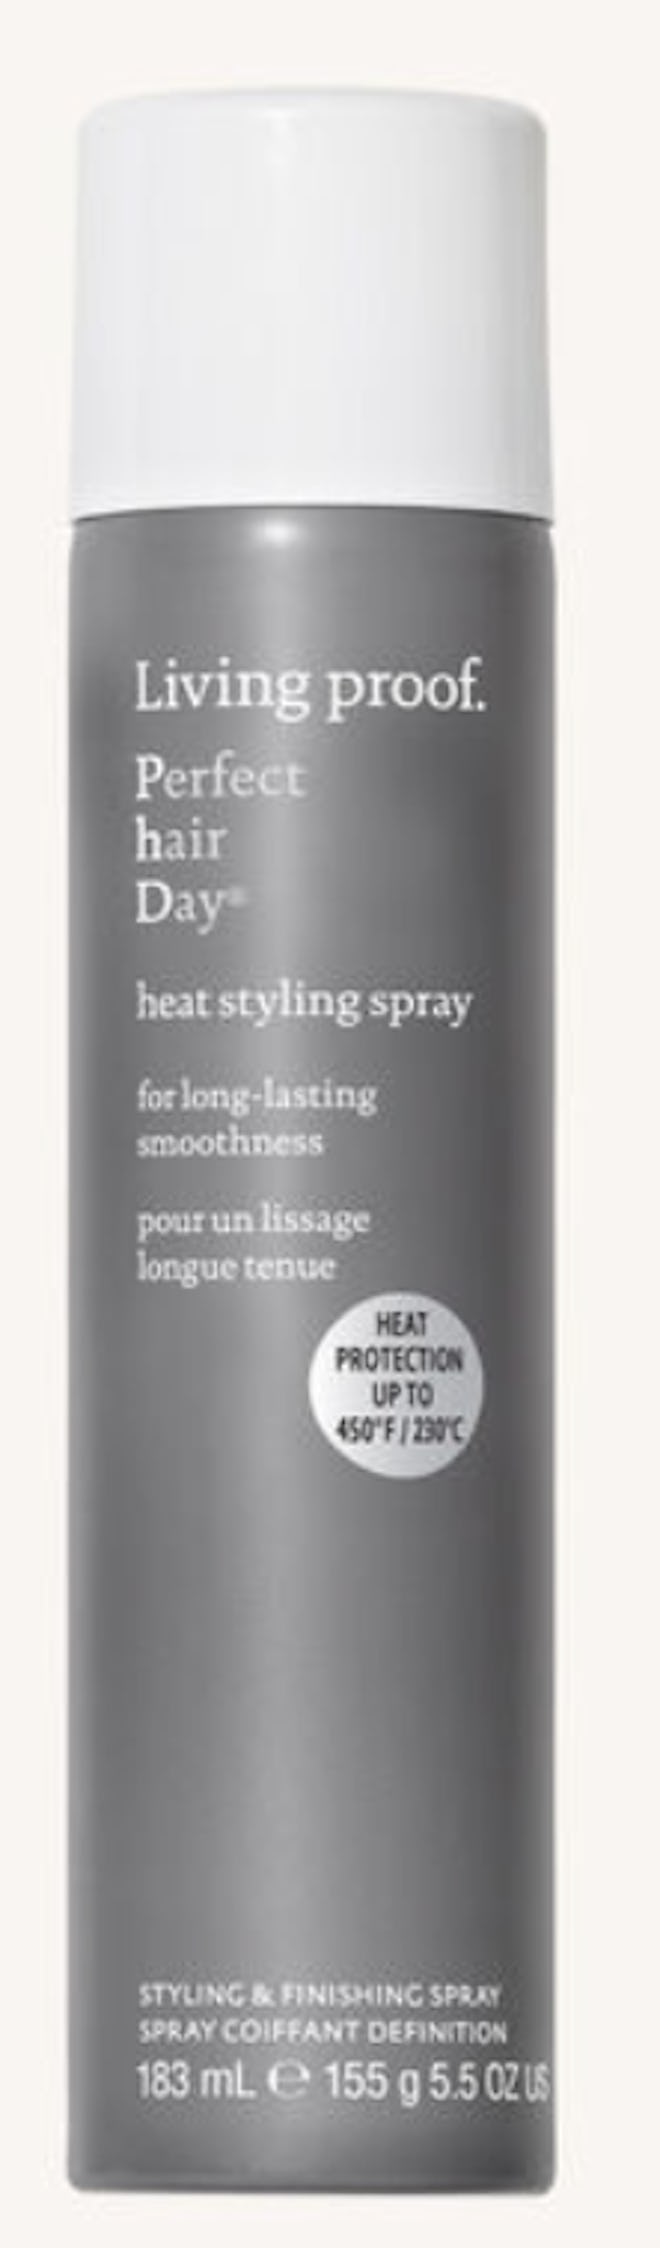 Living Proof Perfect Hair Day Heat Styling Spray for mid-length haircuts